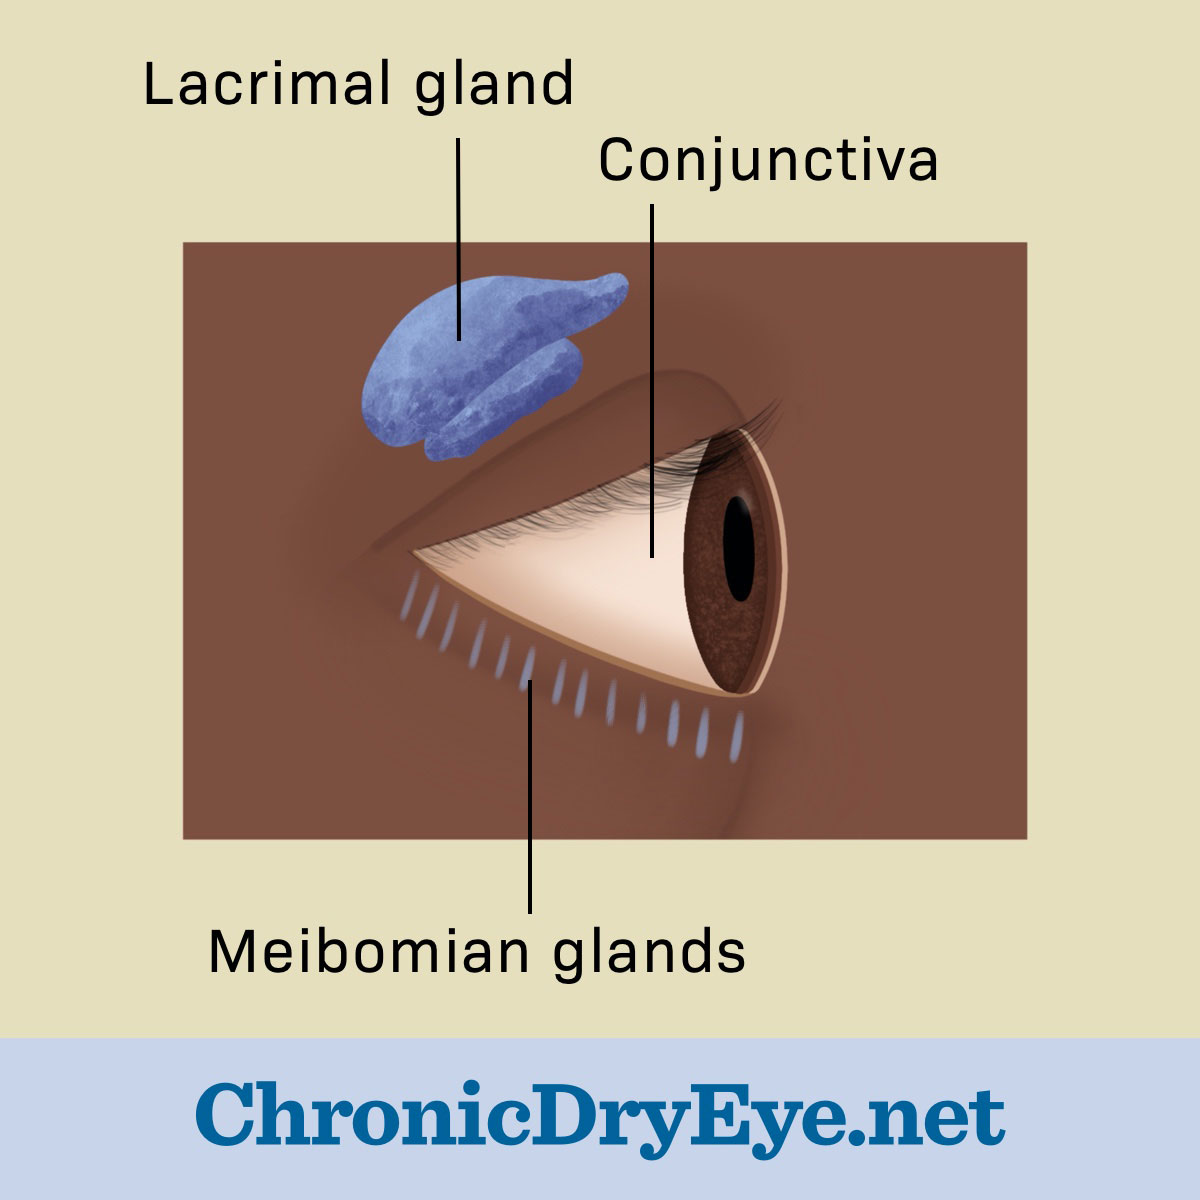 Meibomian and lacrimal glands location